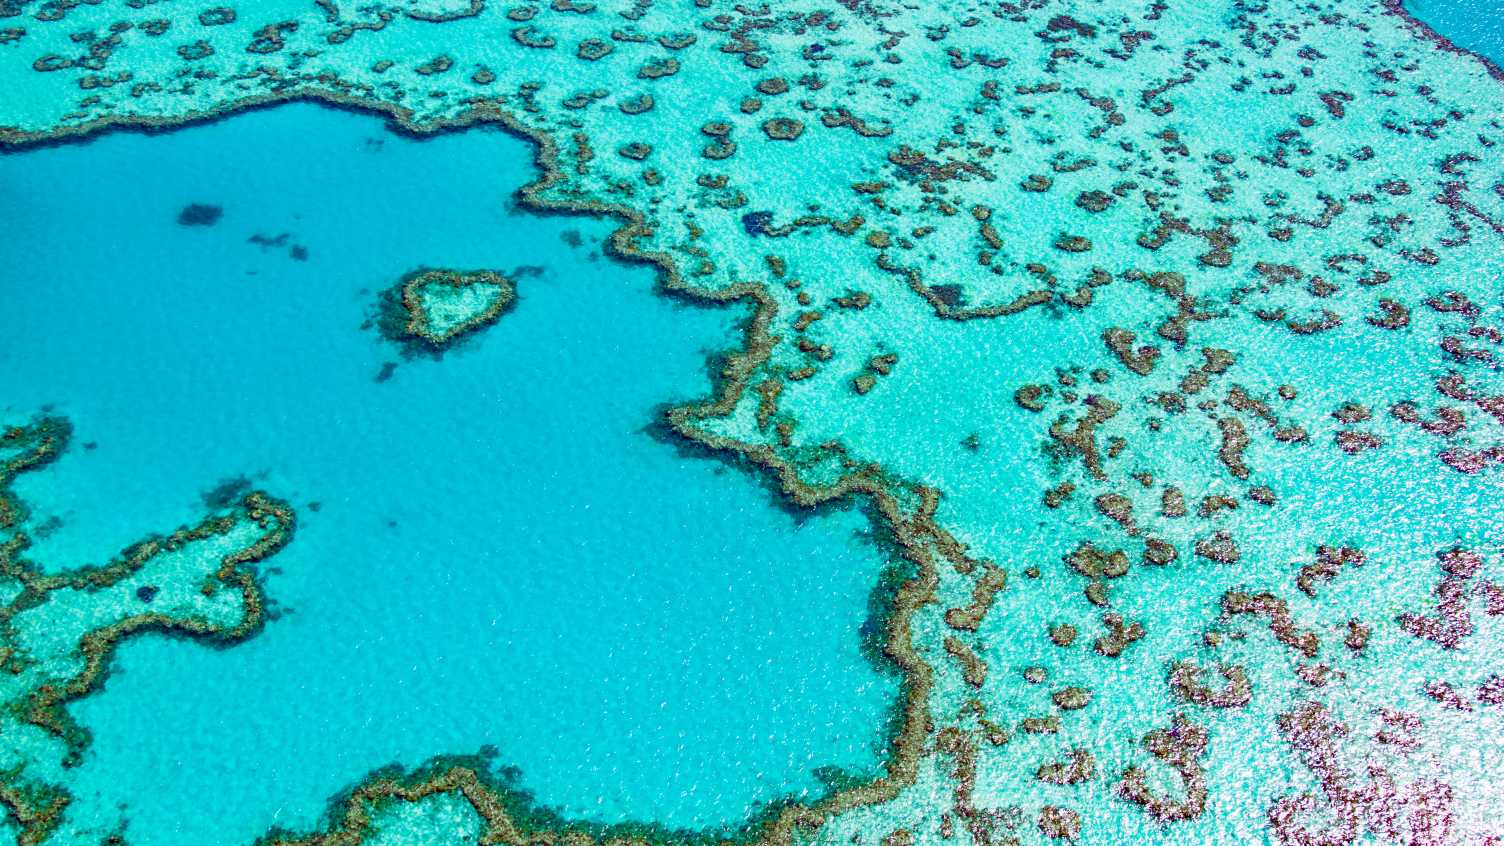 Resilience of Great Barrier Reef offers opportunities for regeneration ...